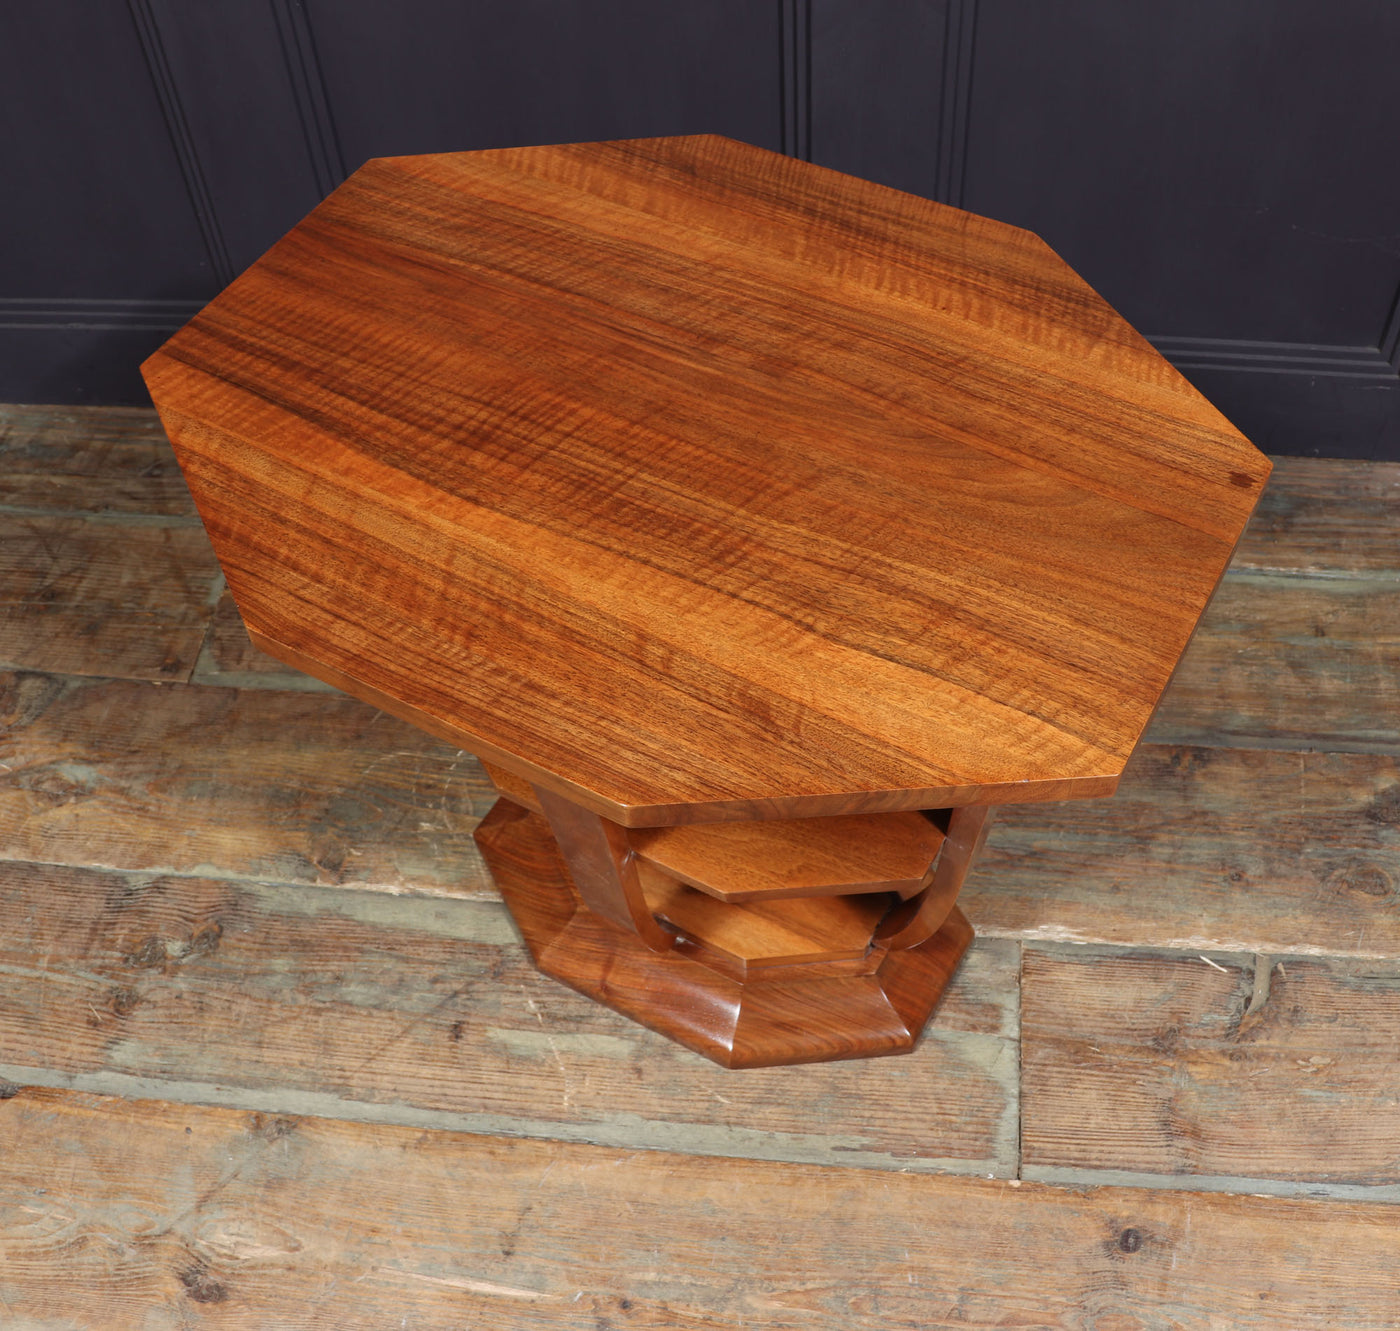 French Art Deco Walnut Occasional Table